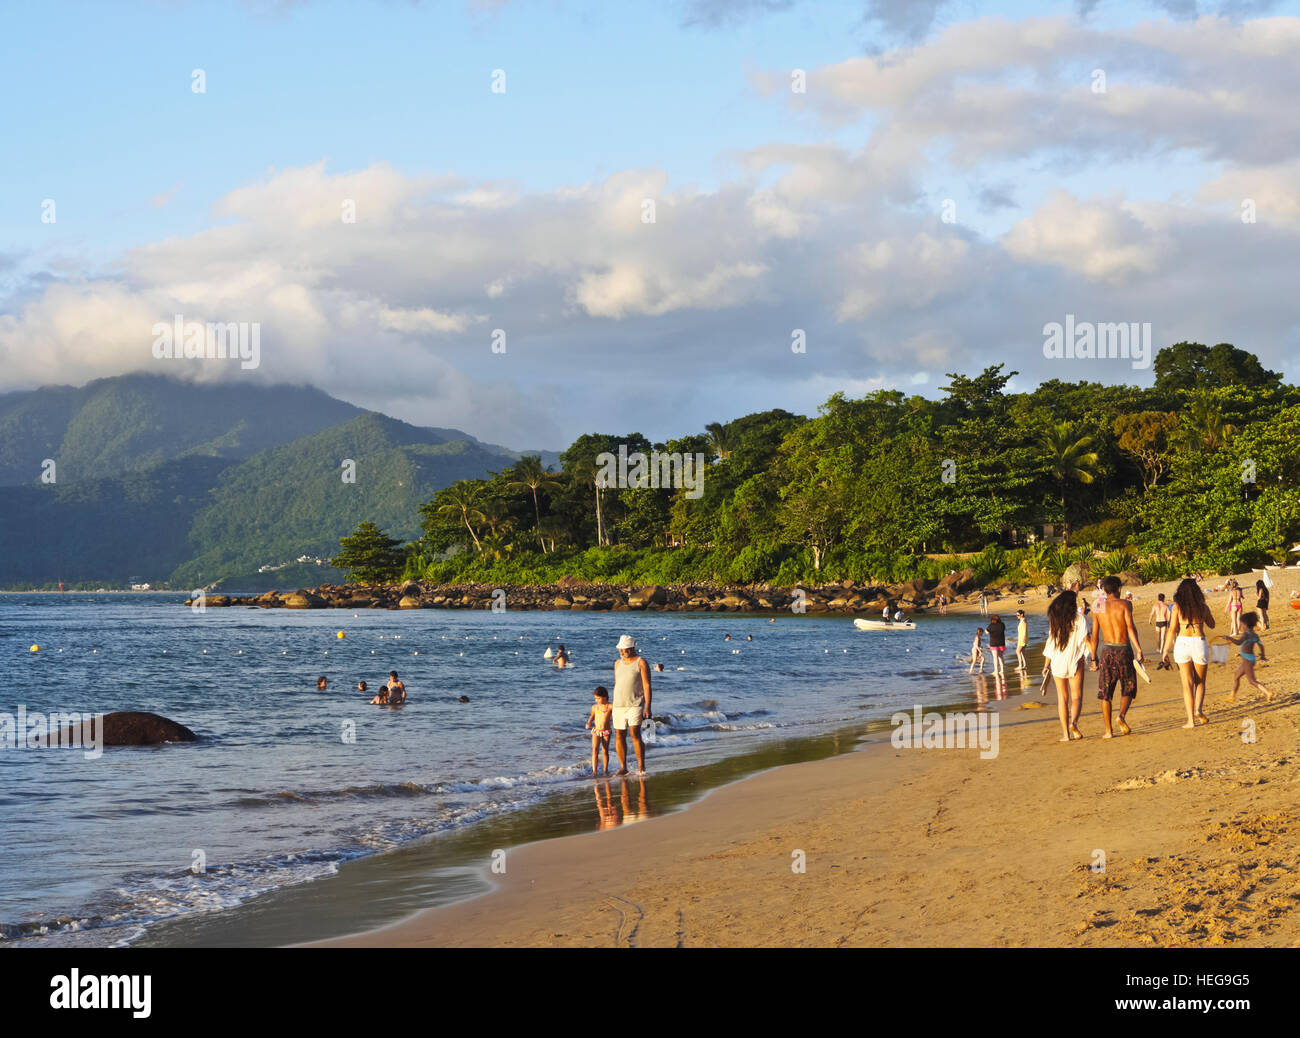 Brazil, State of Sao Paulo, Ilhabela Island, View of the Curral Beach. Stock Photo